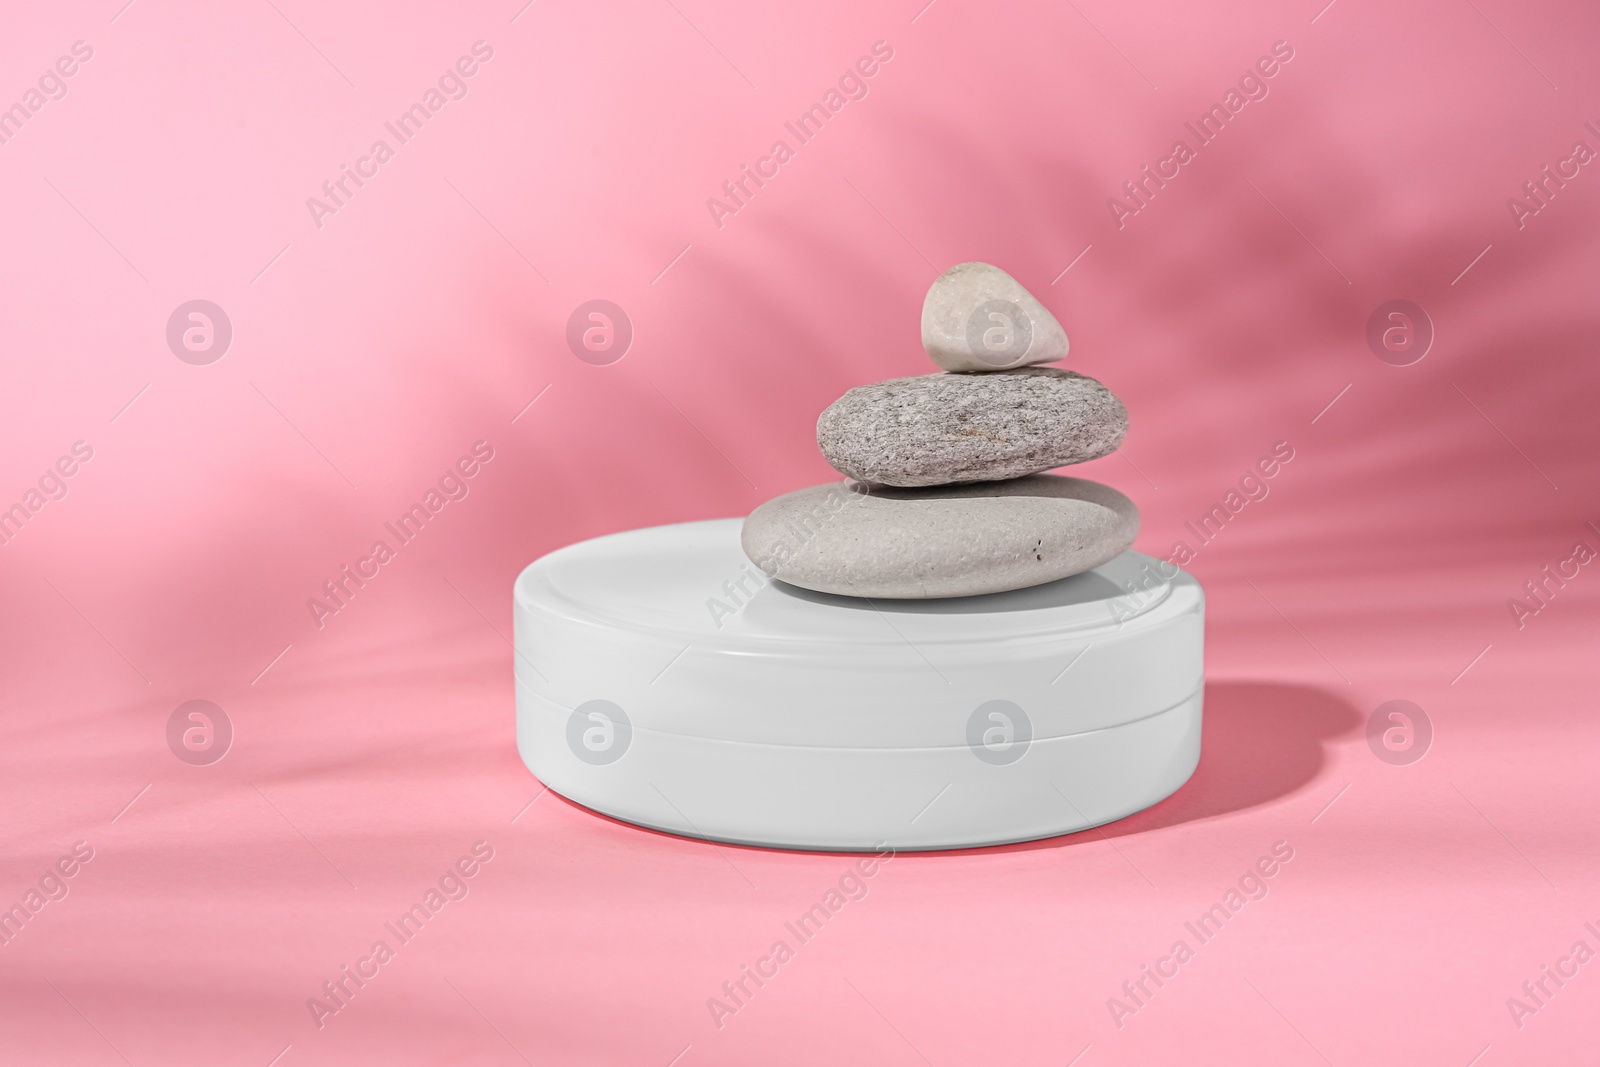 Photo of Cosmetic product, stacked stones and shadow of tropical leaf on pink background